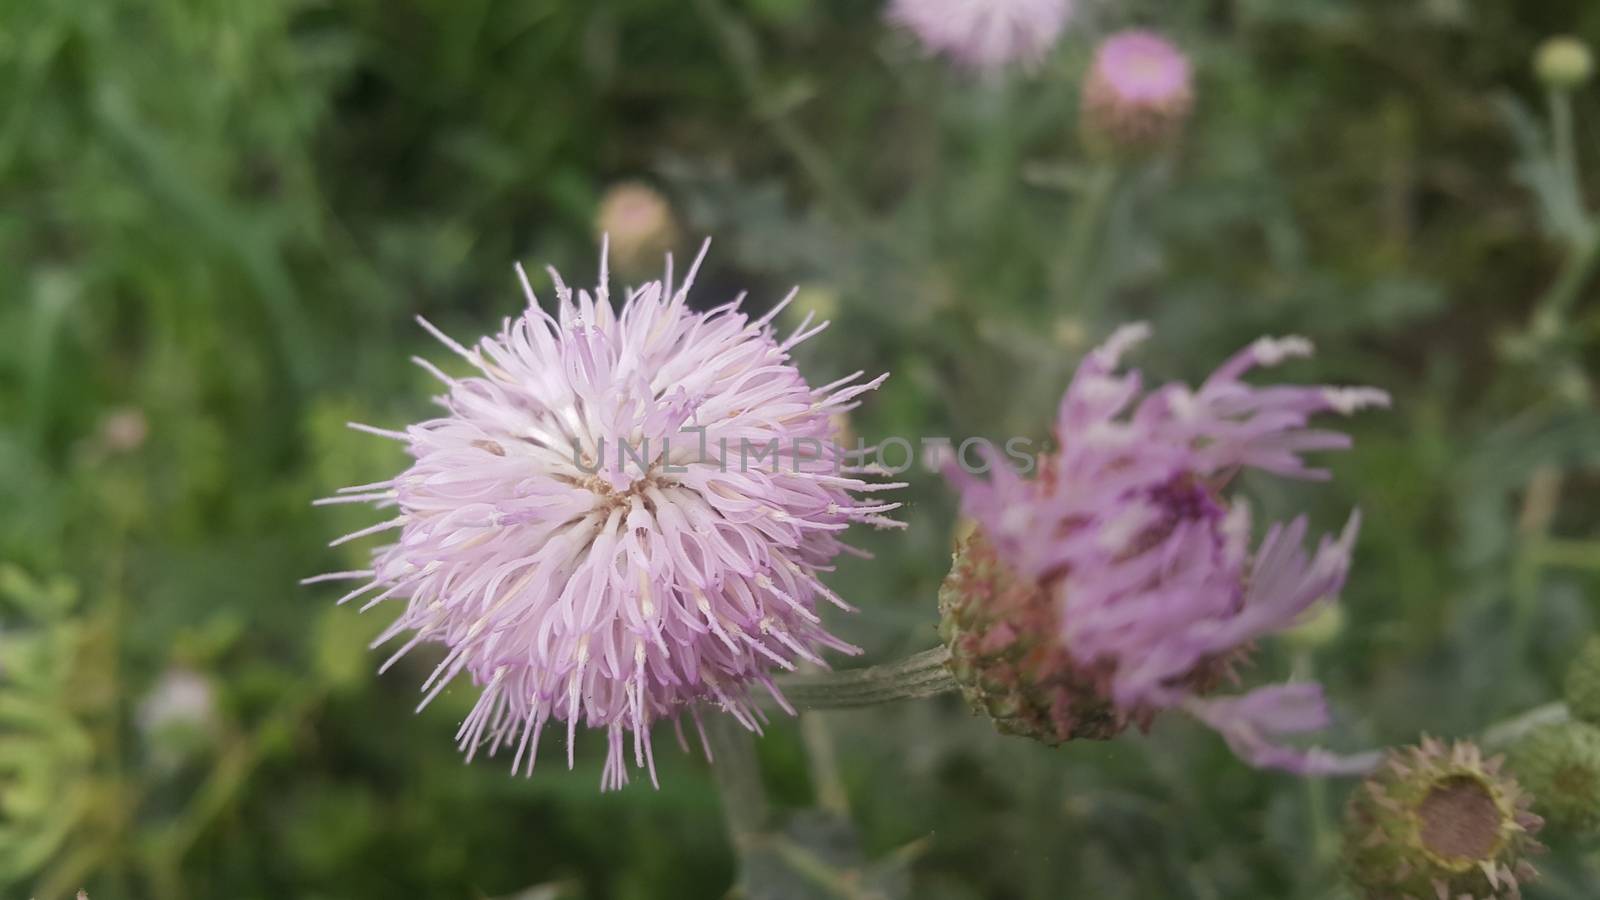 Perennial thistle plant with spine tipped triangular leaves and purple flower by Photochowk